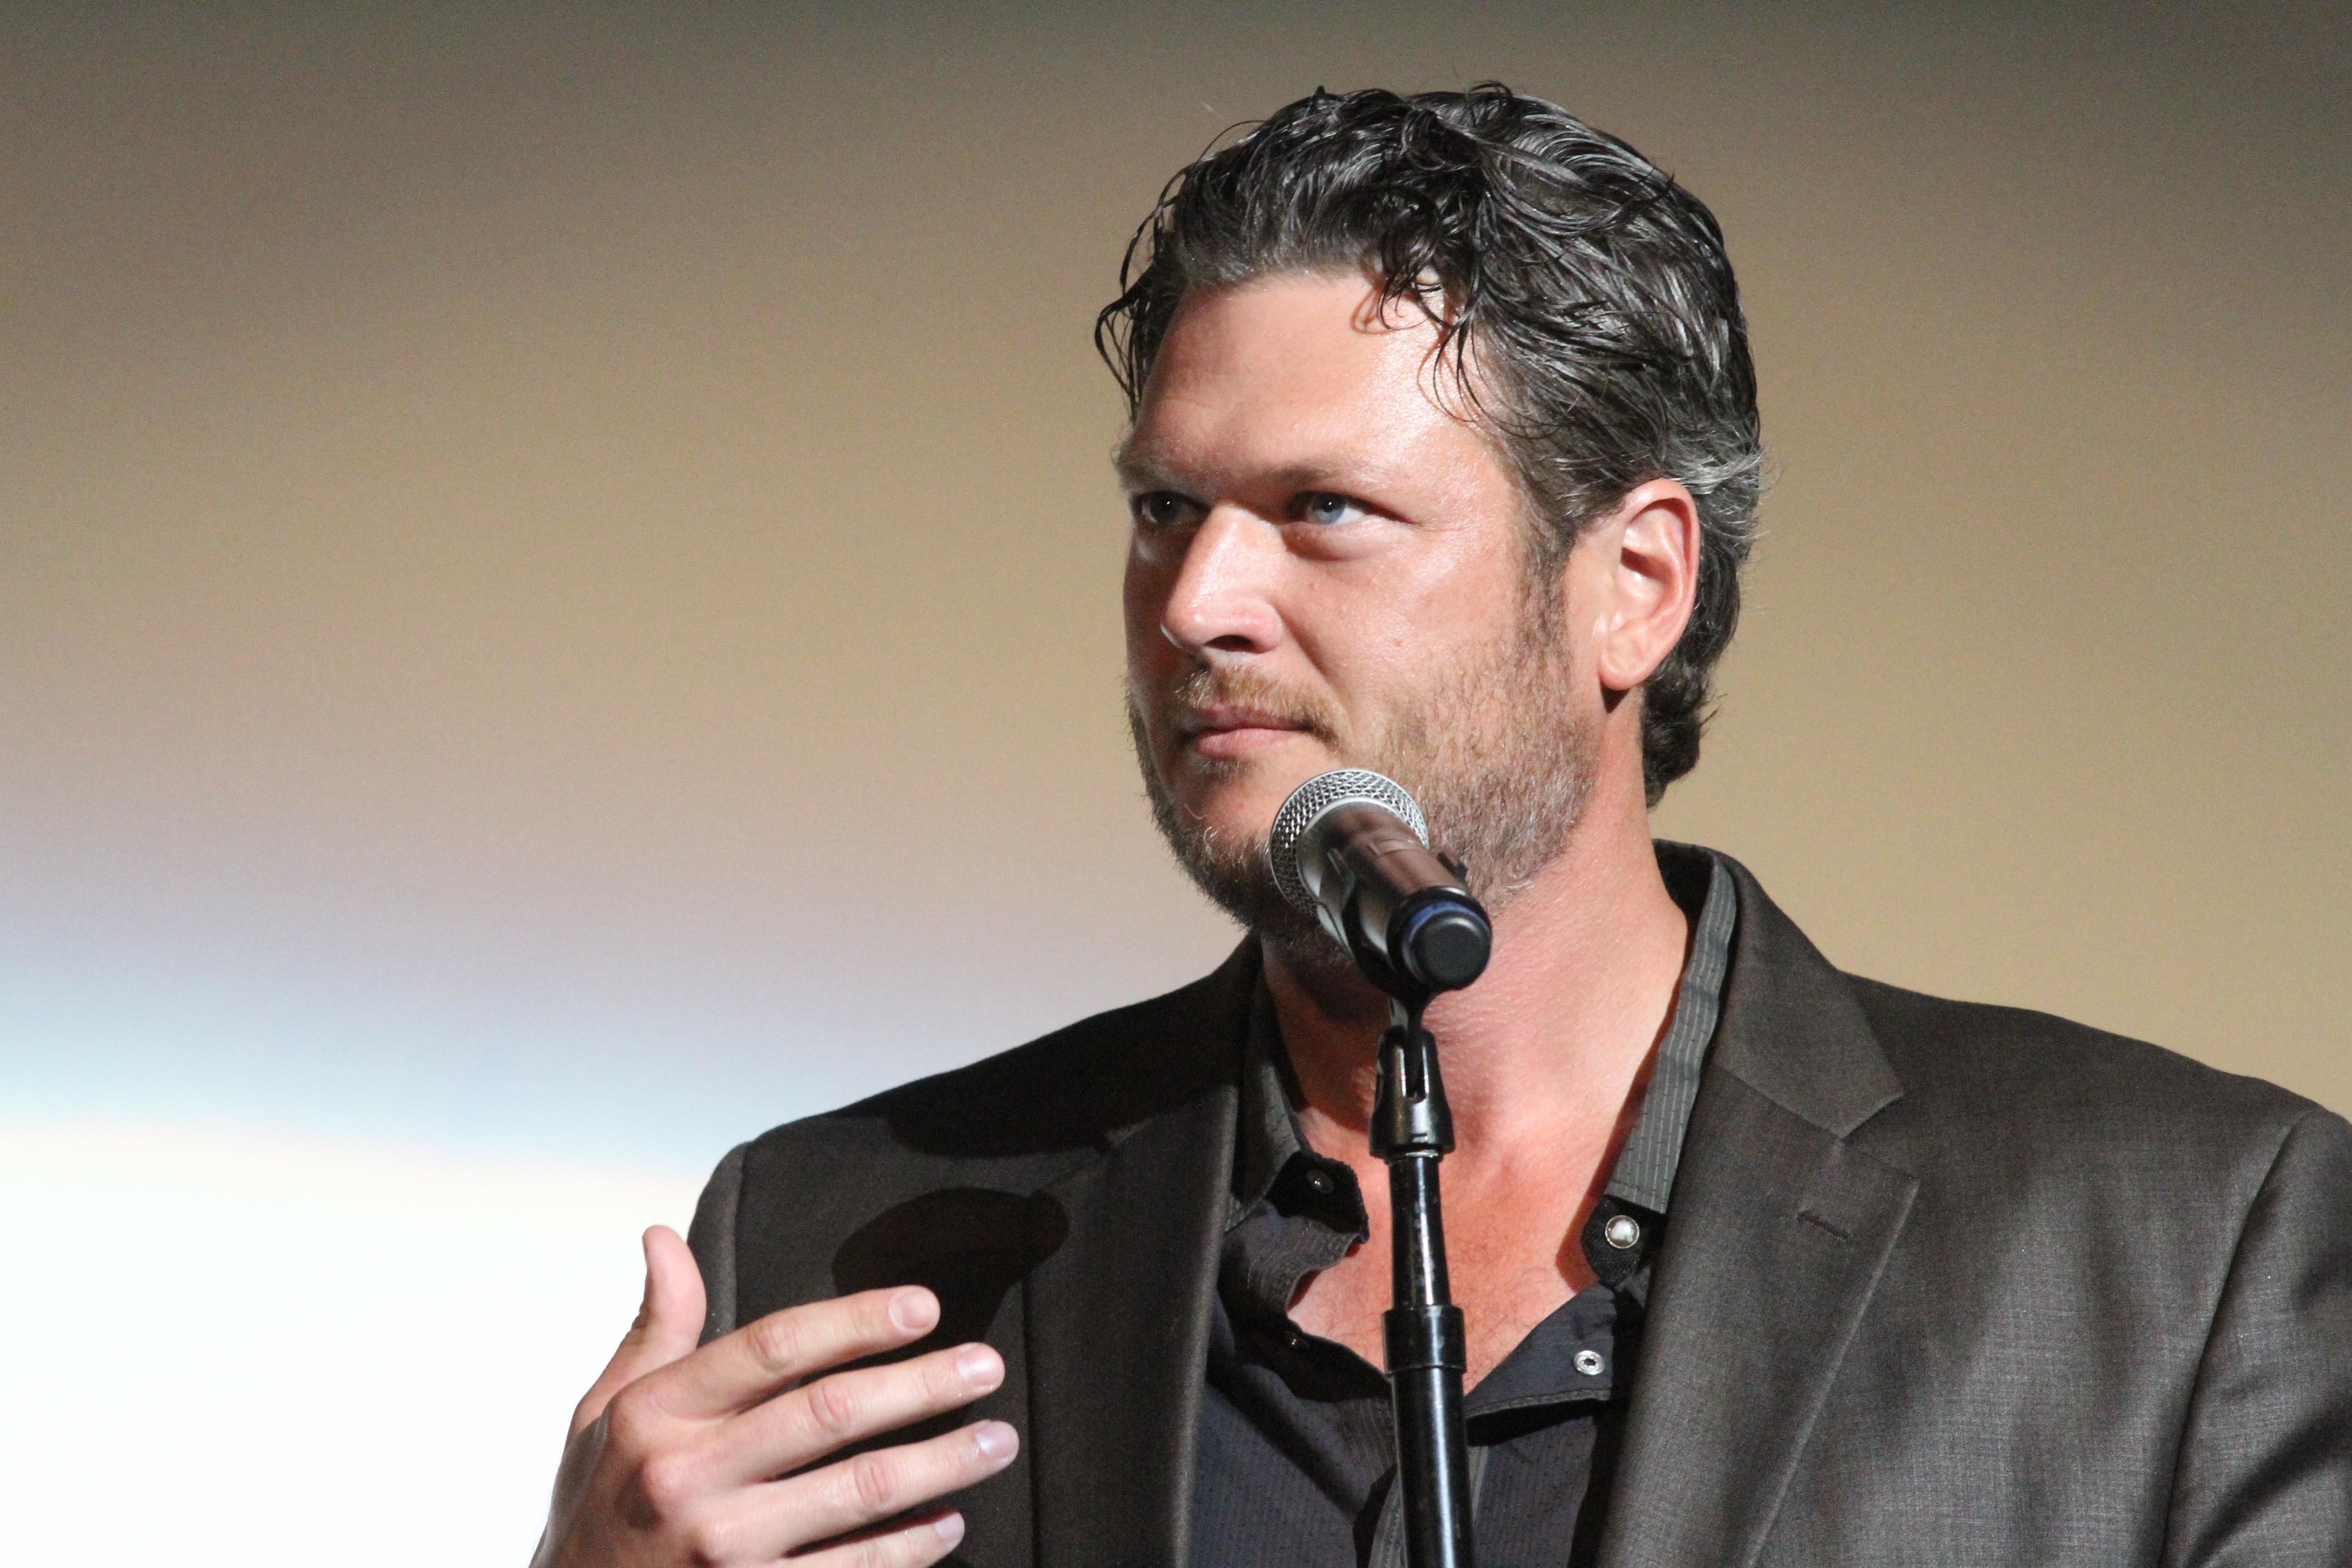 Blake Shelton, country singer | Photo: Getty Images